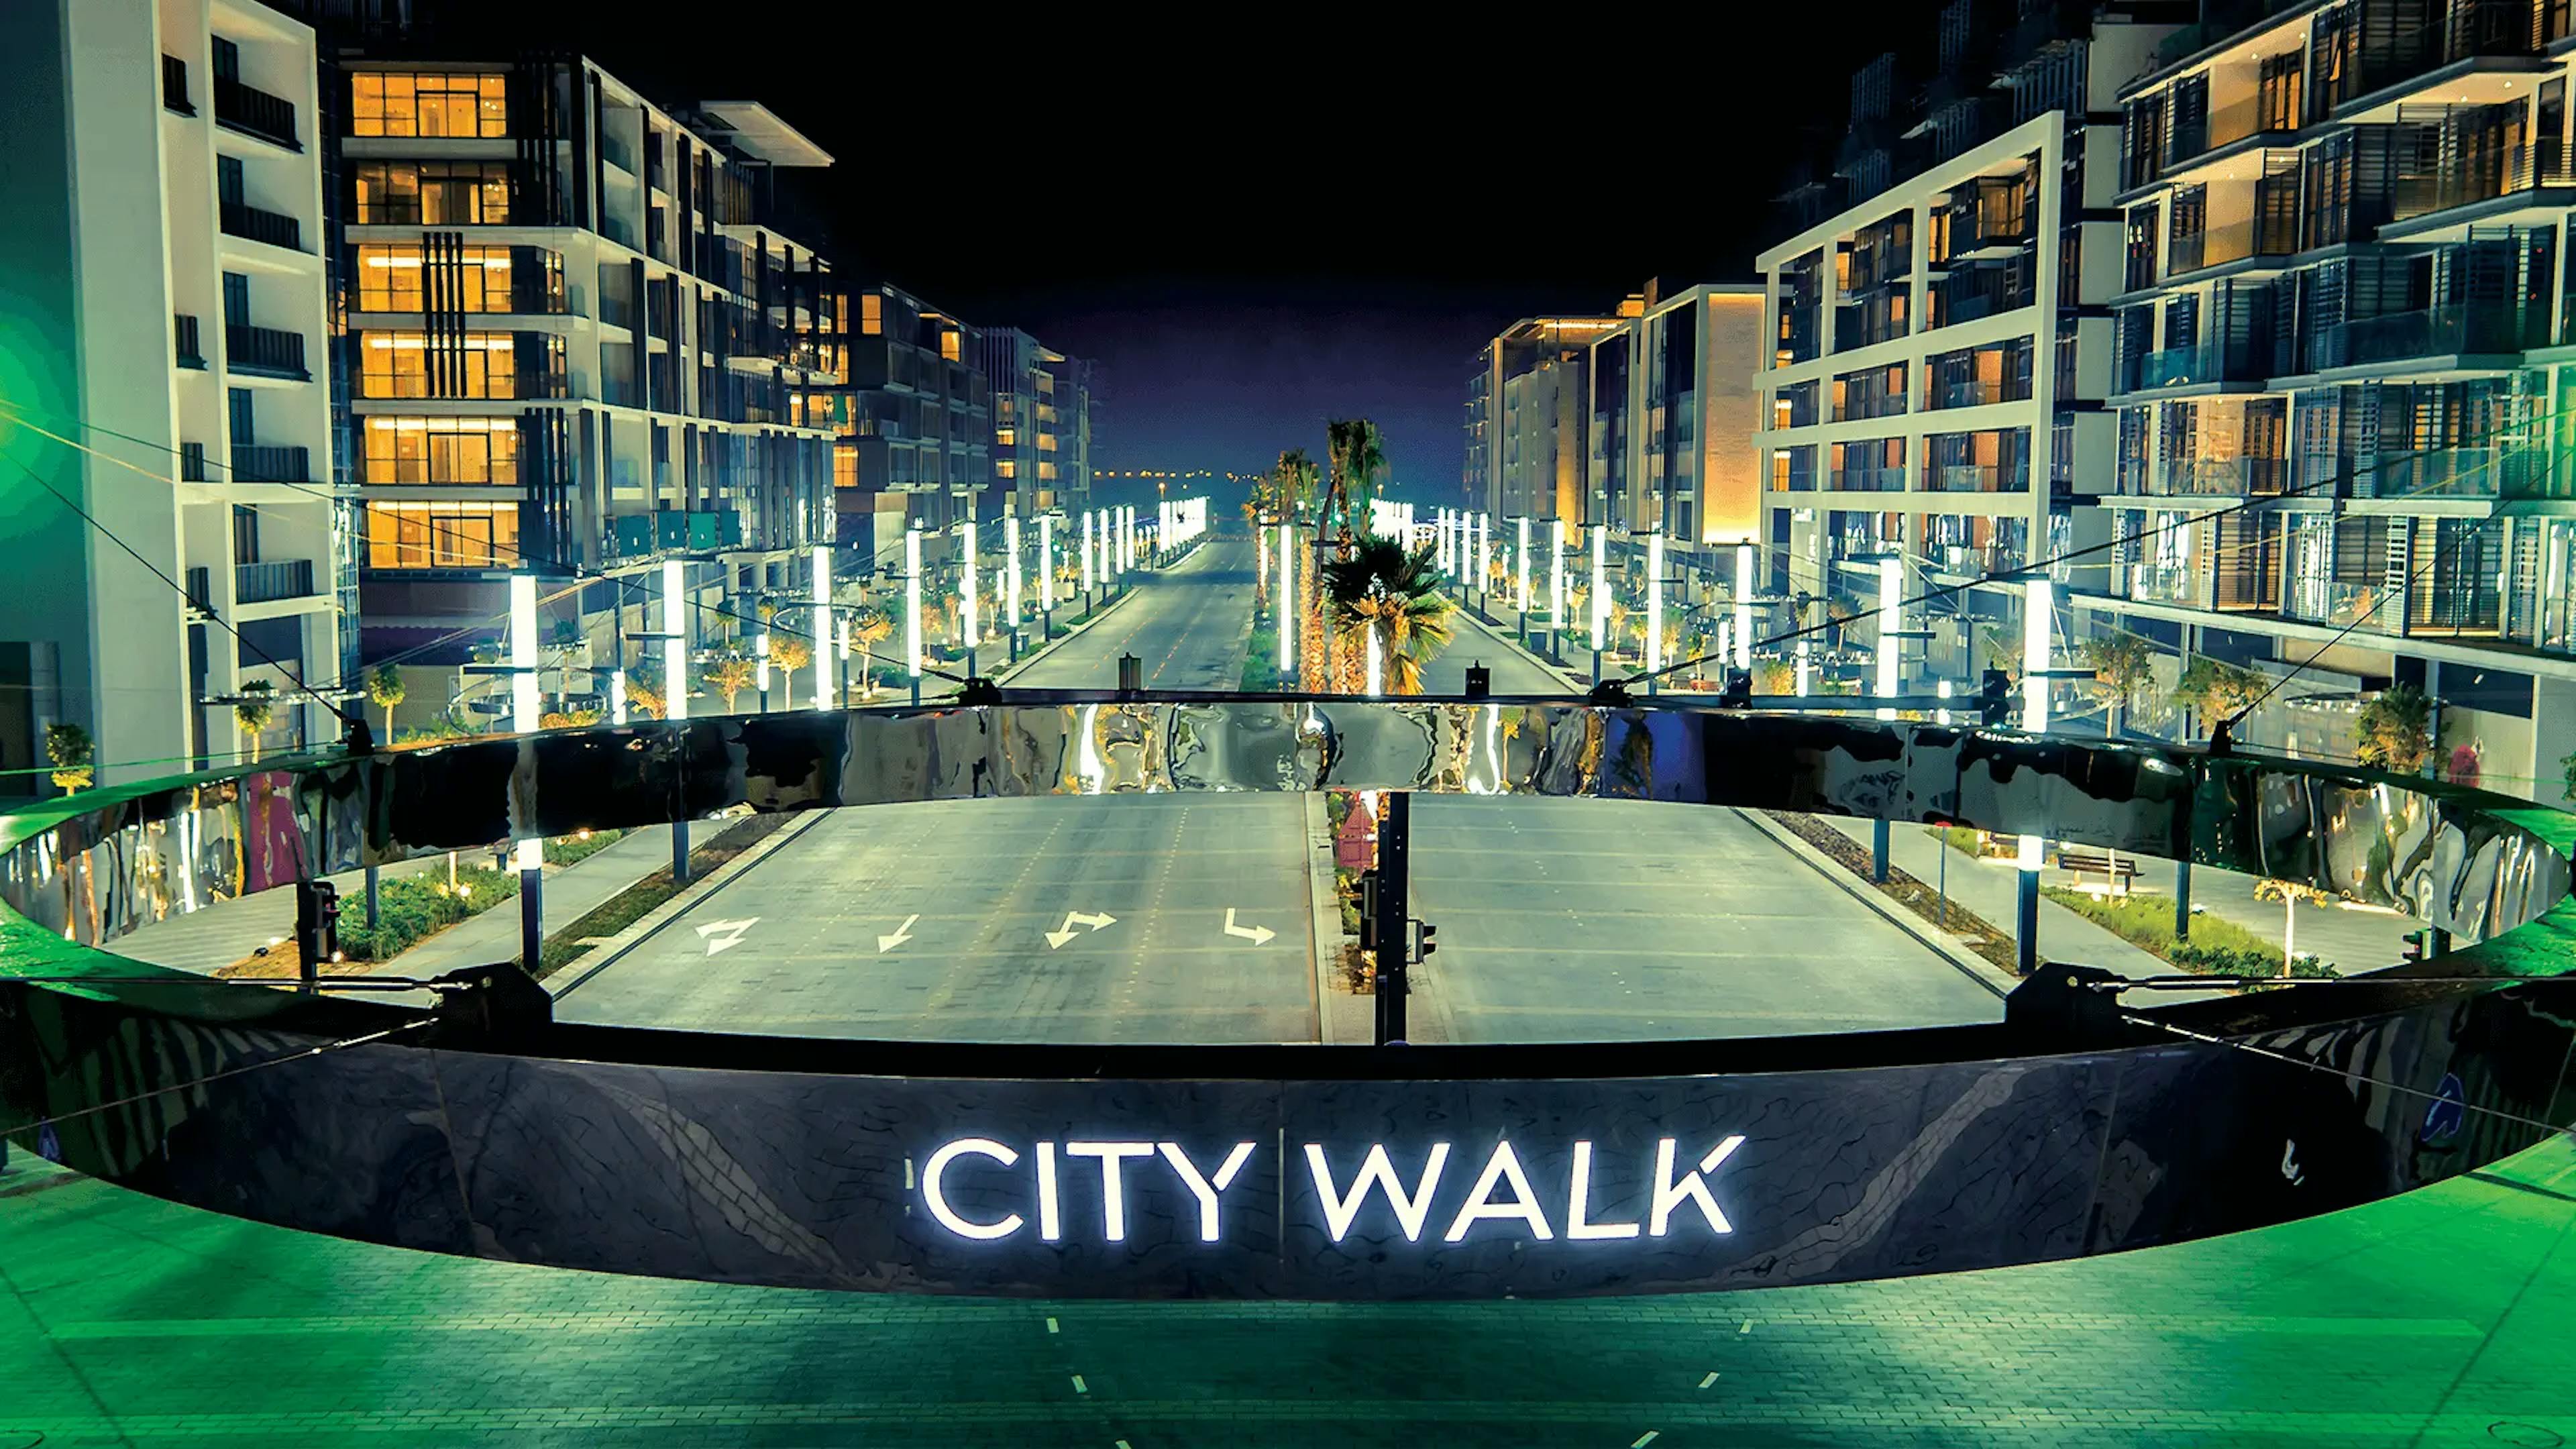 Introducing the Verve City Walk Lifestyle